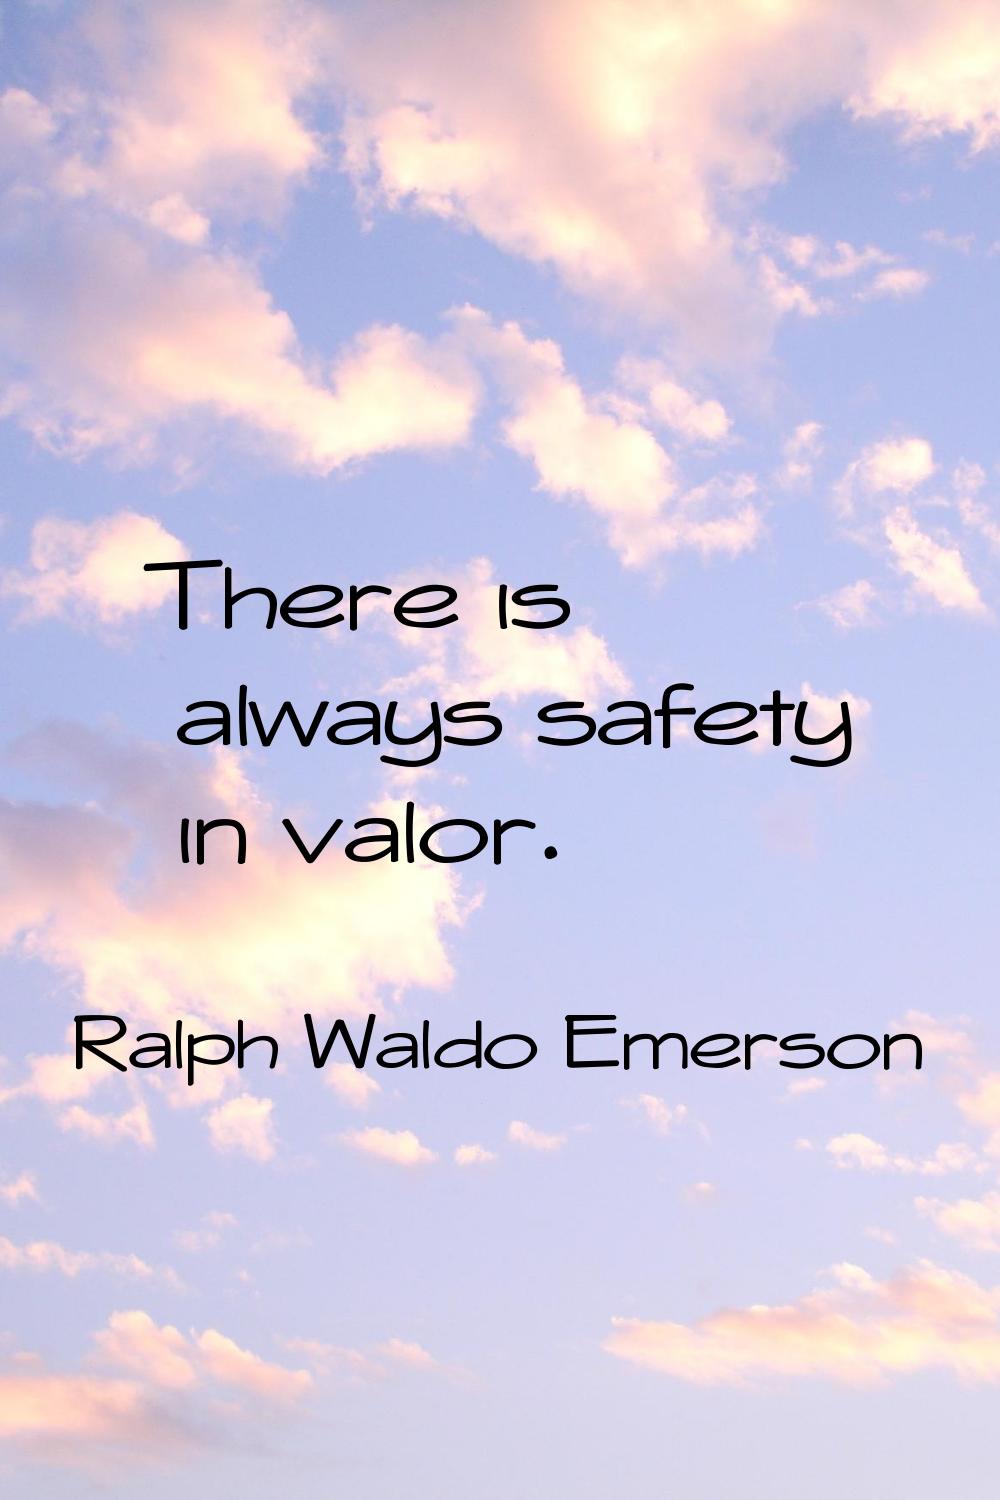 There is always safety in valor.